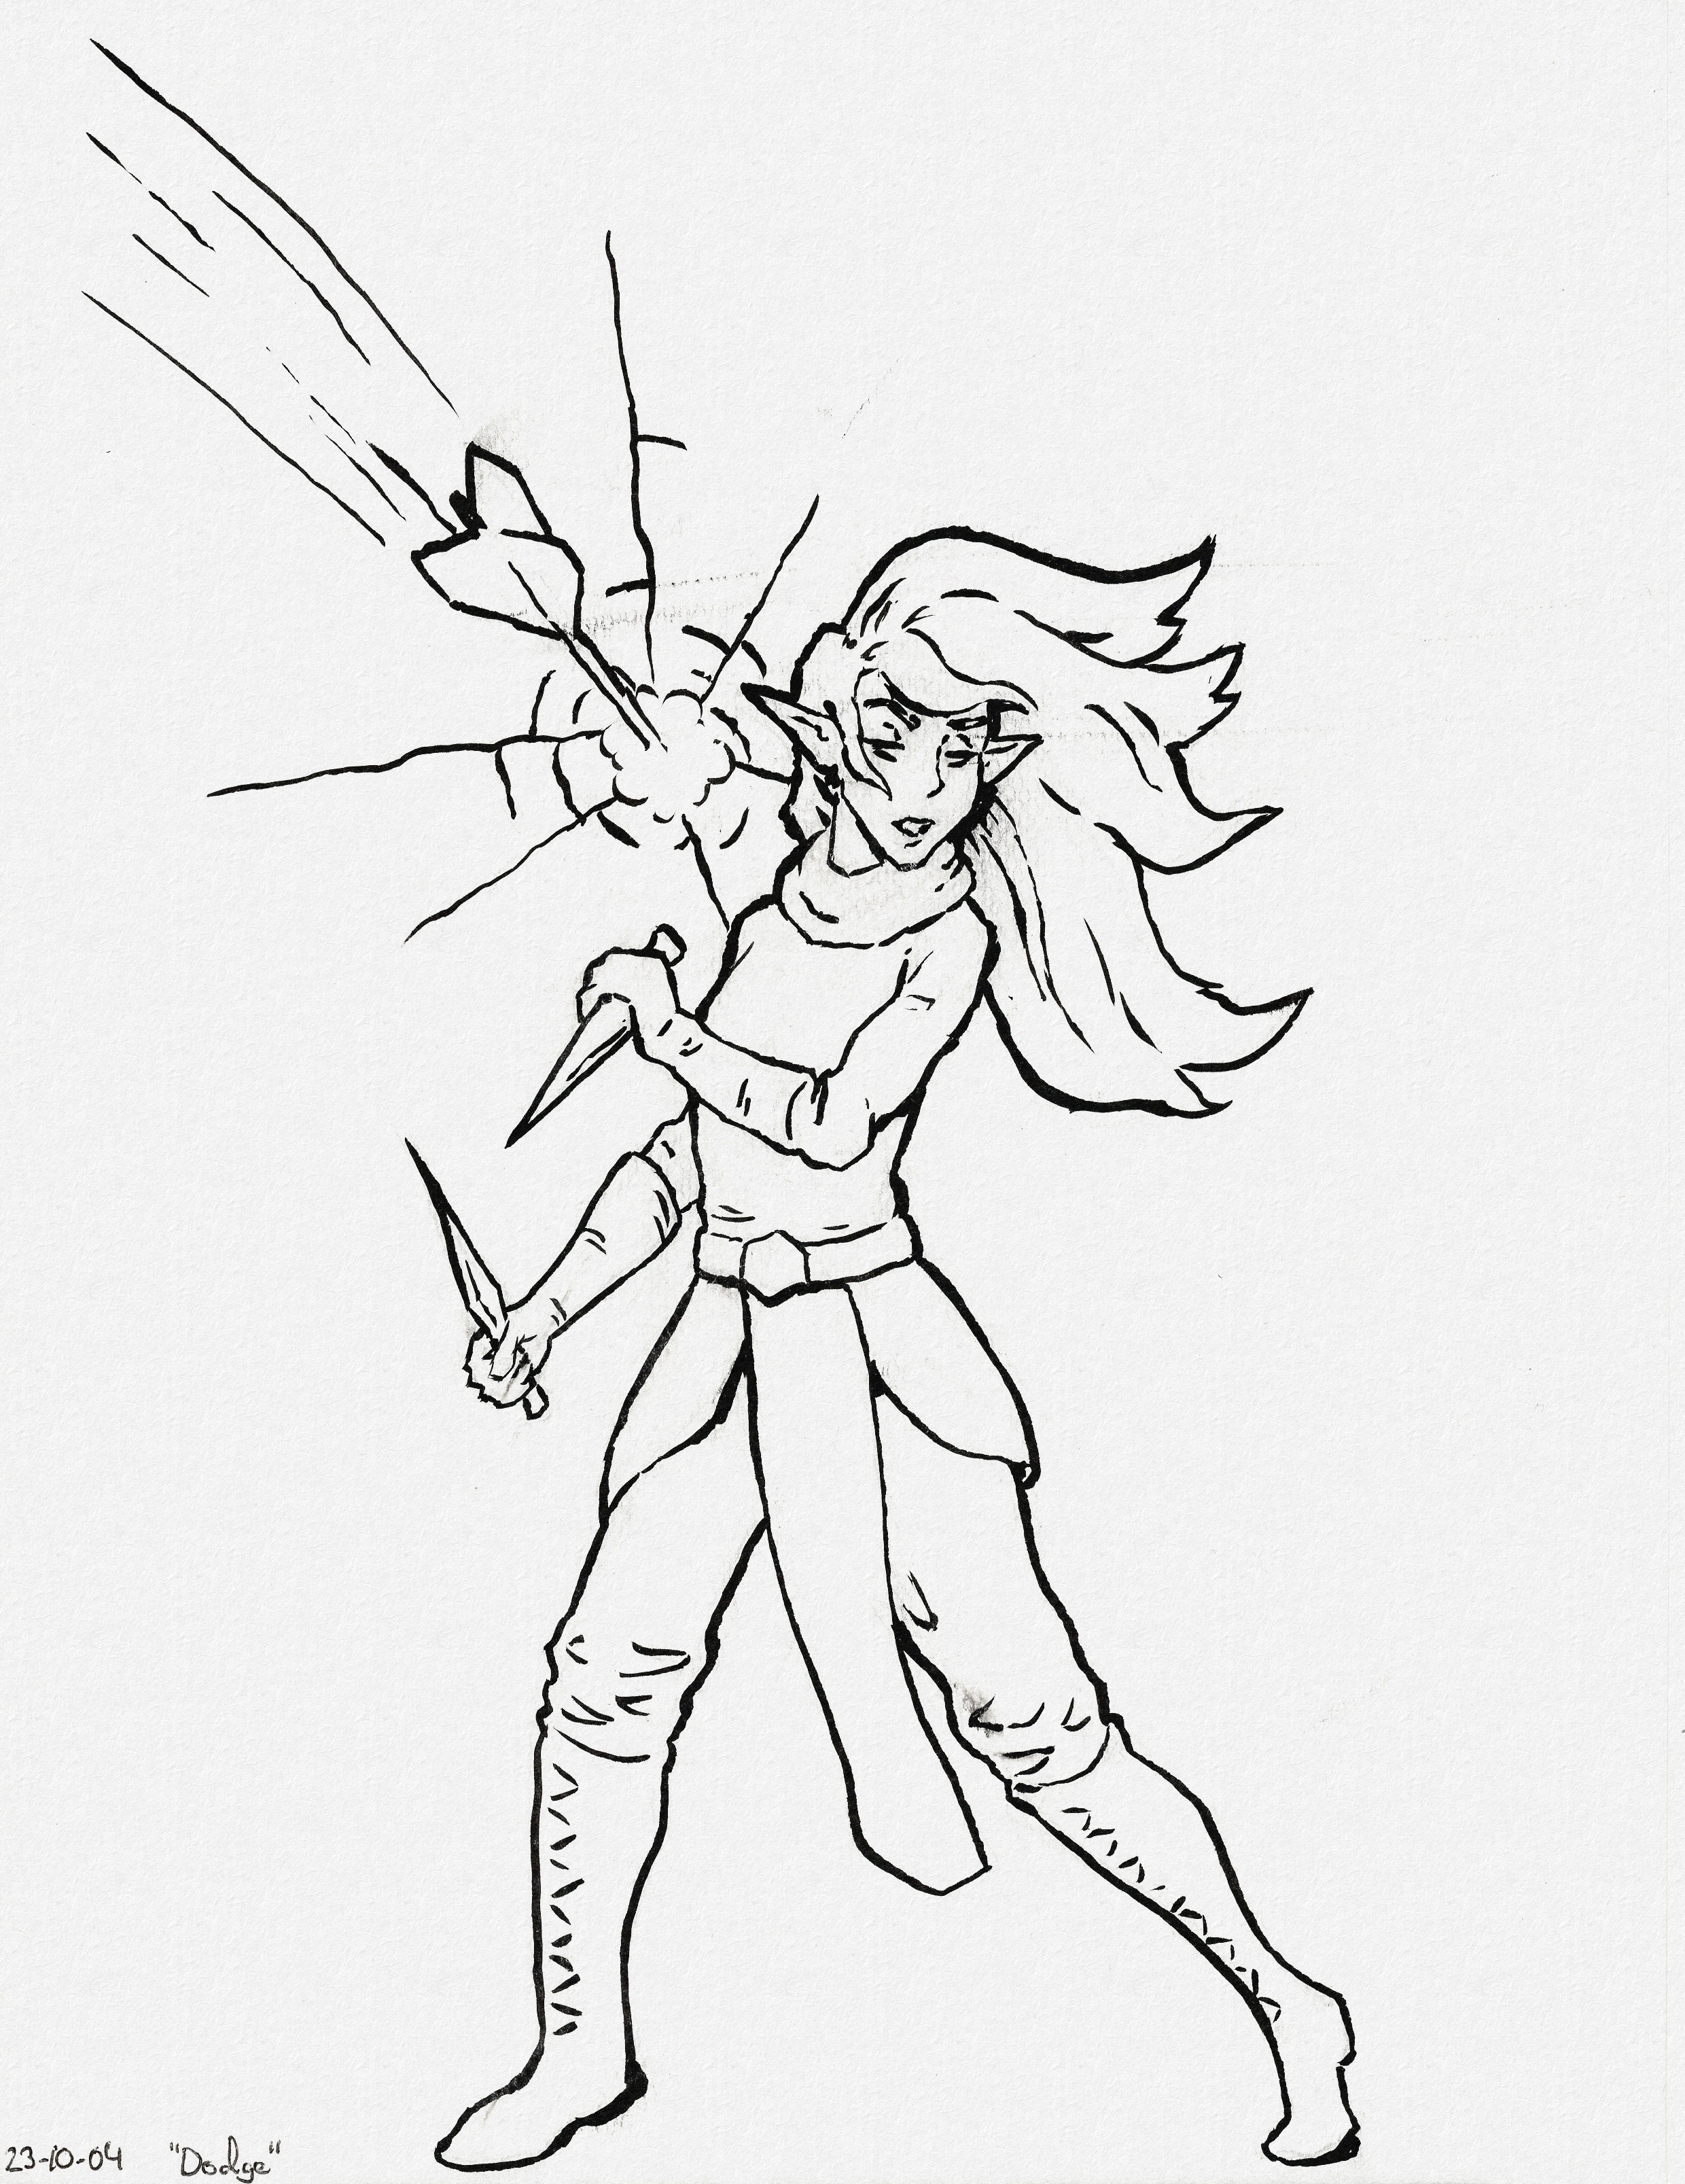 A dagger-wielding elven assassin narrowly dodging a large arrow aimed at their head. The impact of the arrow has made their long hair billow to the side and cracked the wall behind them in a radial pattern.